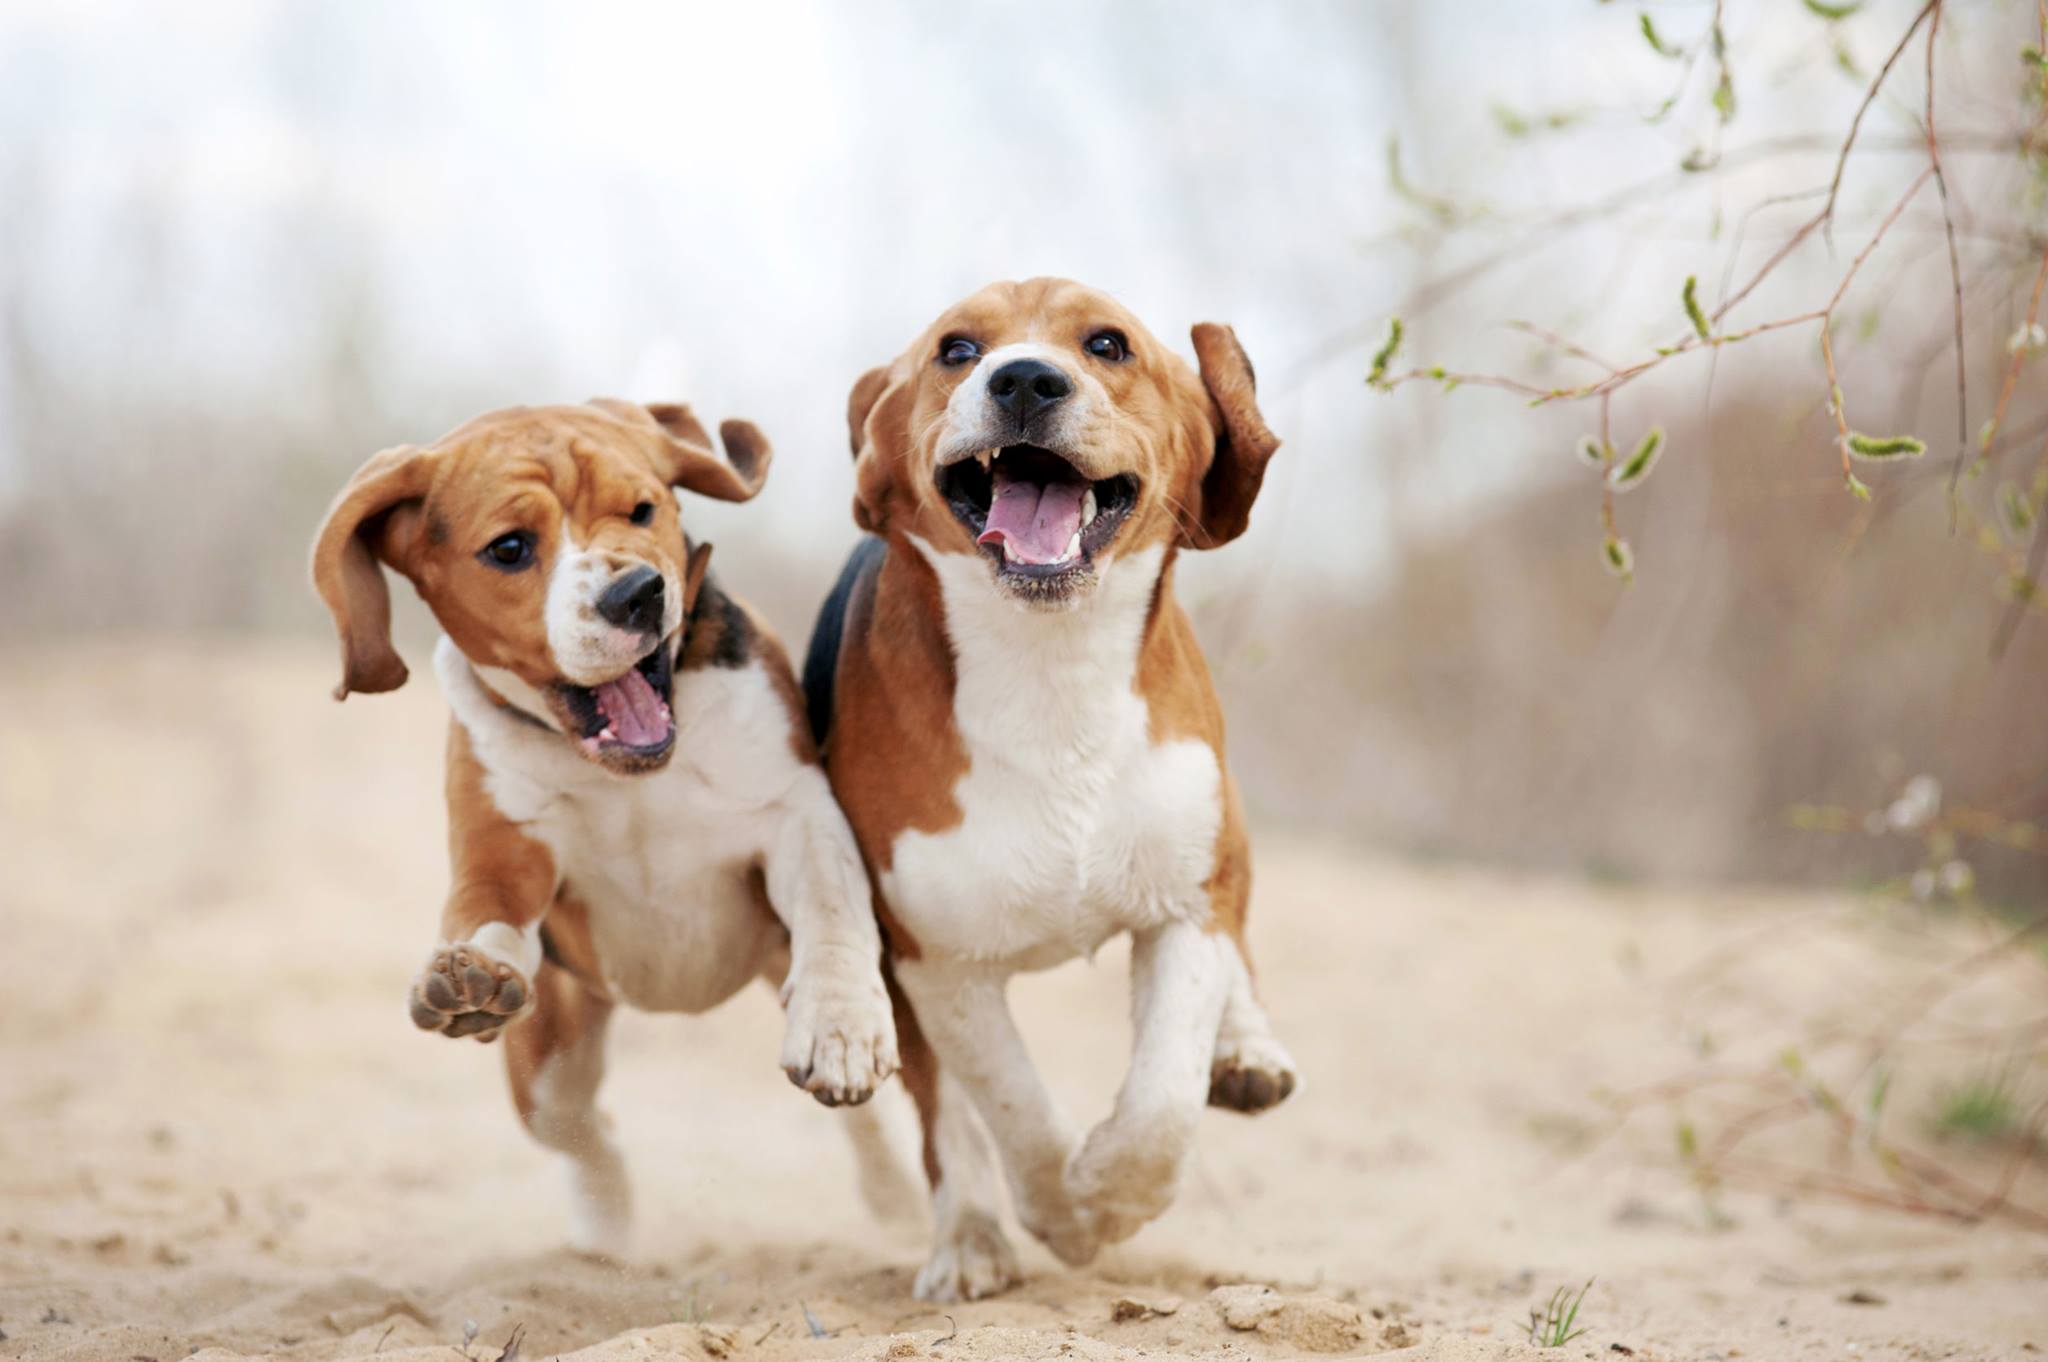 two Beagles happily running next to each other in the forest